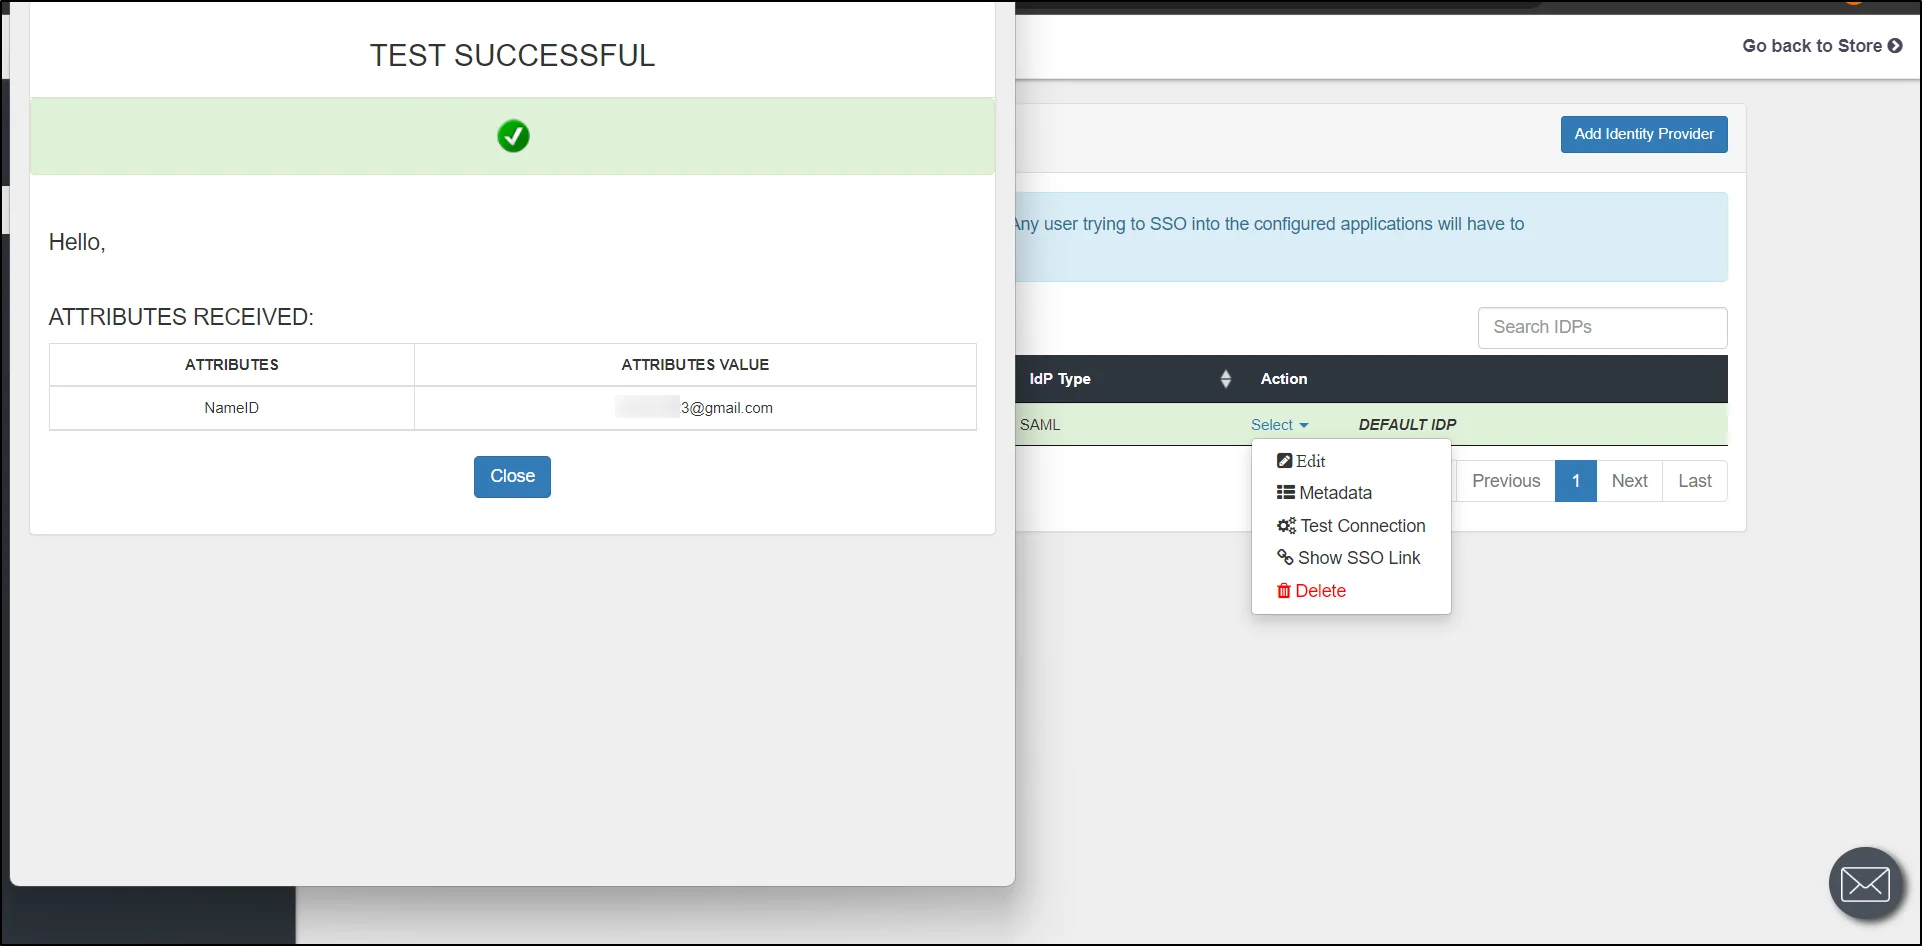 Shopify-Store-SAML-SP-Single-Sign-On-Test-Connection-is-Successfull